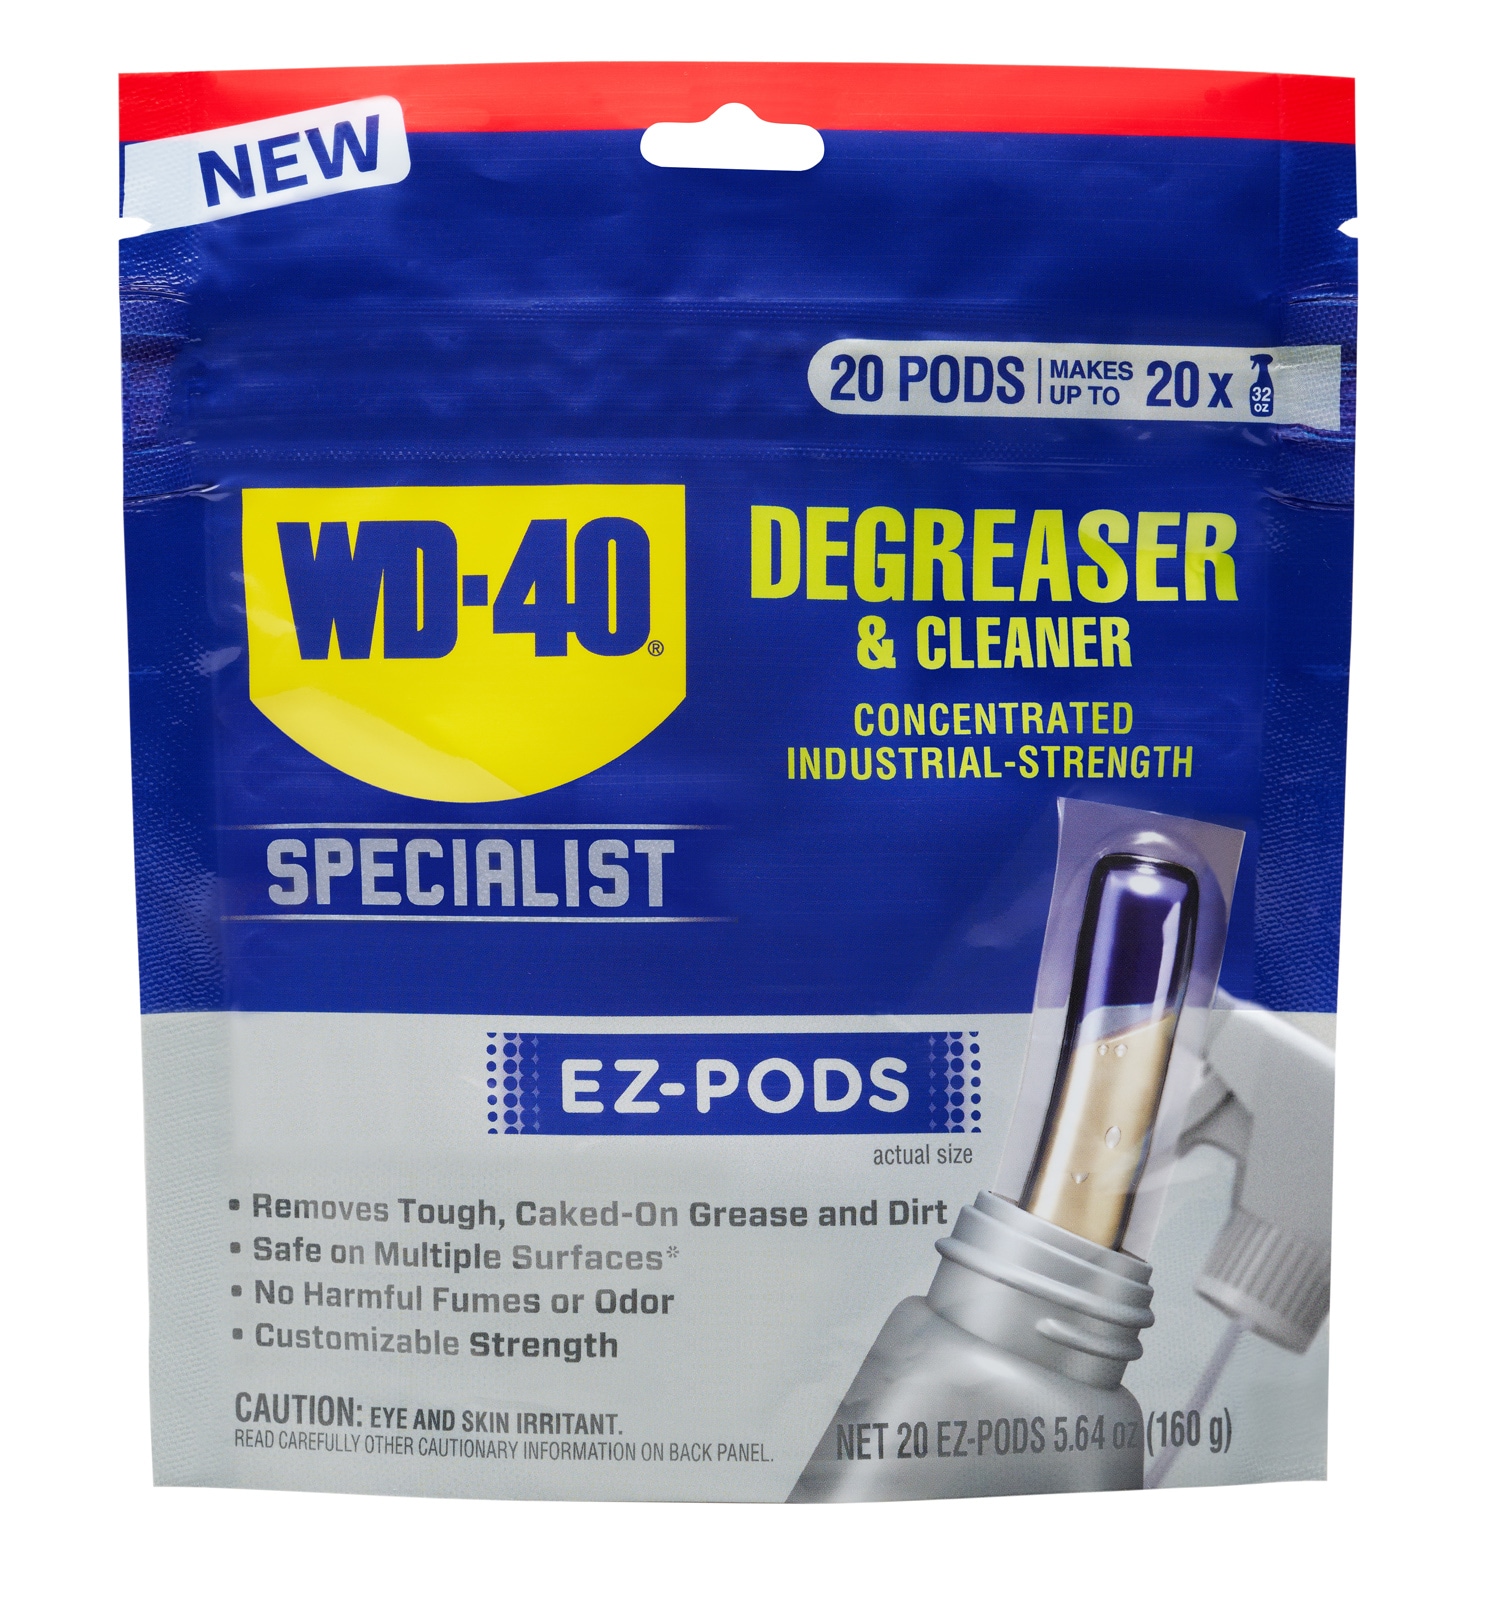 WD-40 300899 Specialist Degreaser and Cleaner Ez-pod, 20 Count, Unscented, Price/6 ea